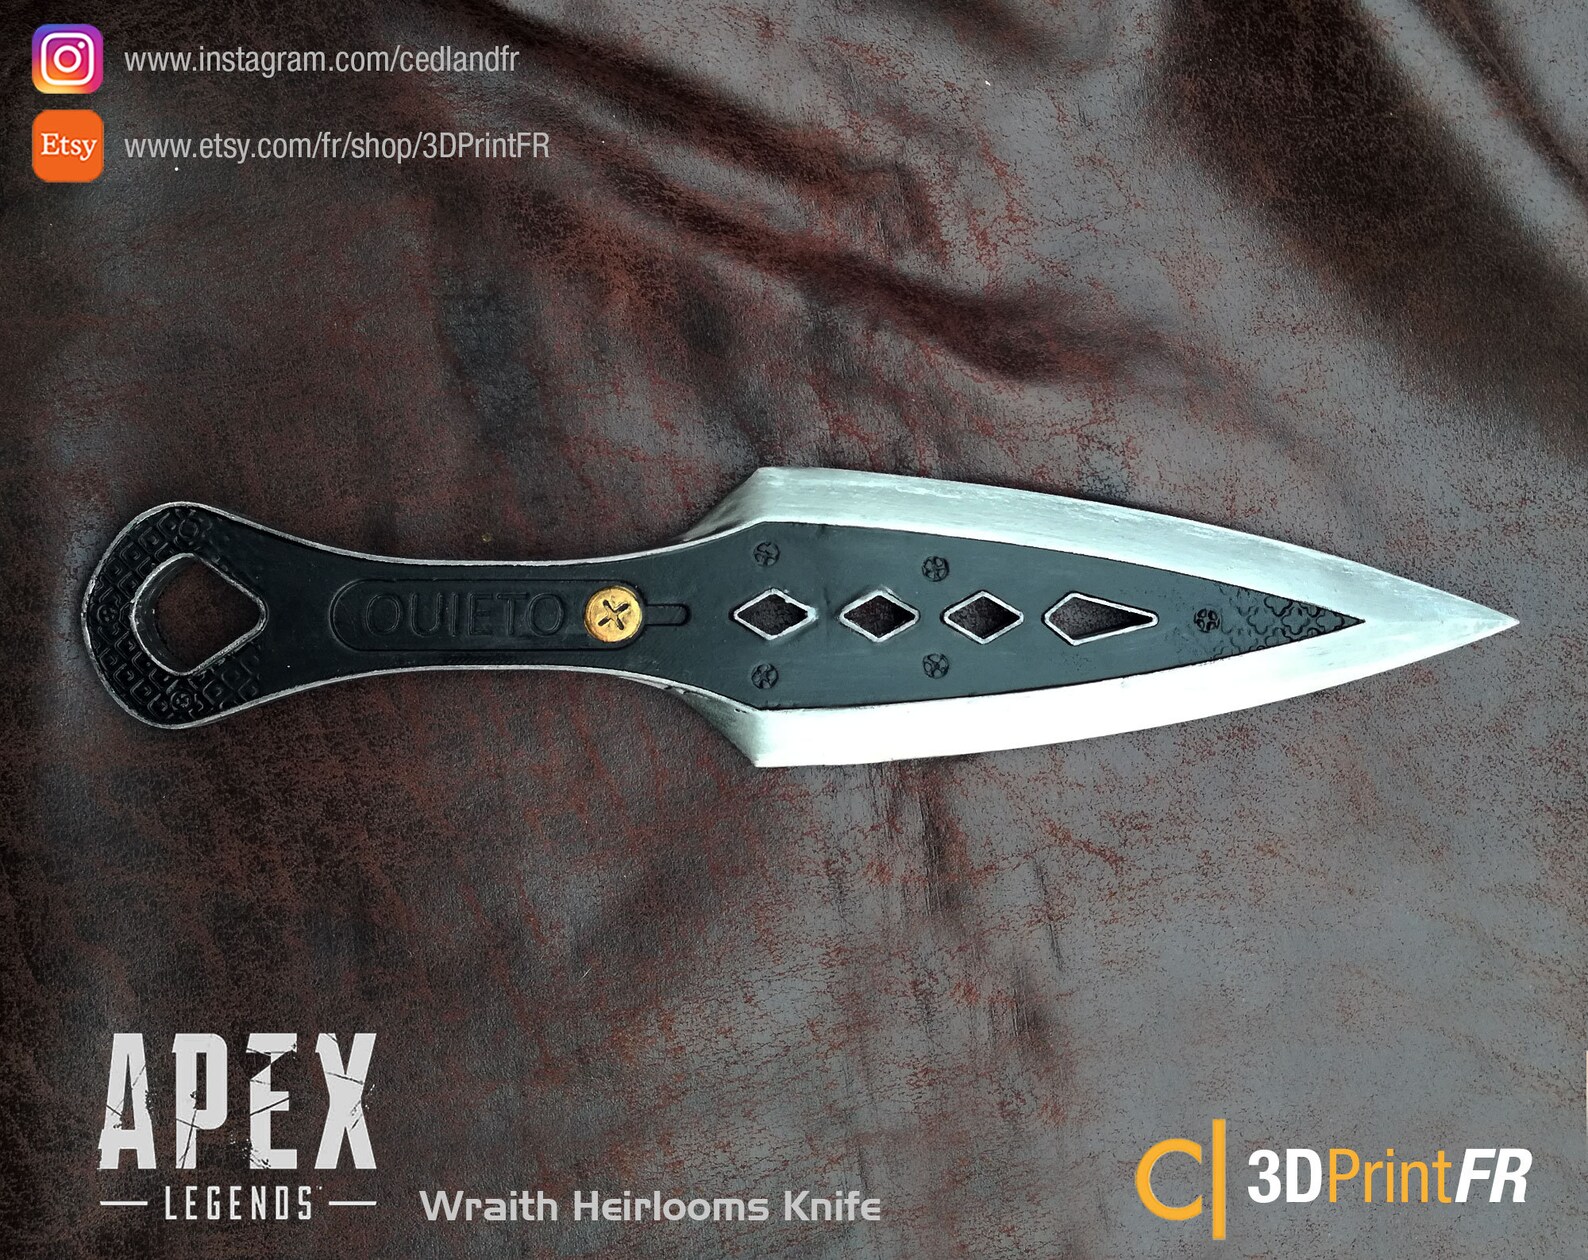 Wraith Heirlooms Knife from Apex Legends Replica 1:1 painted image 0.